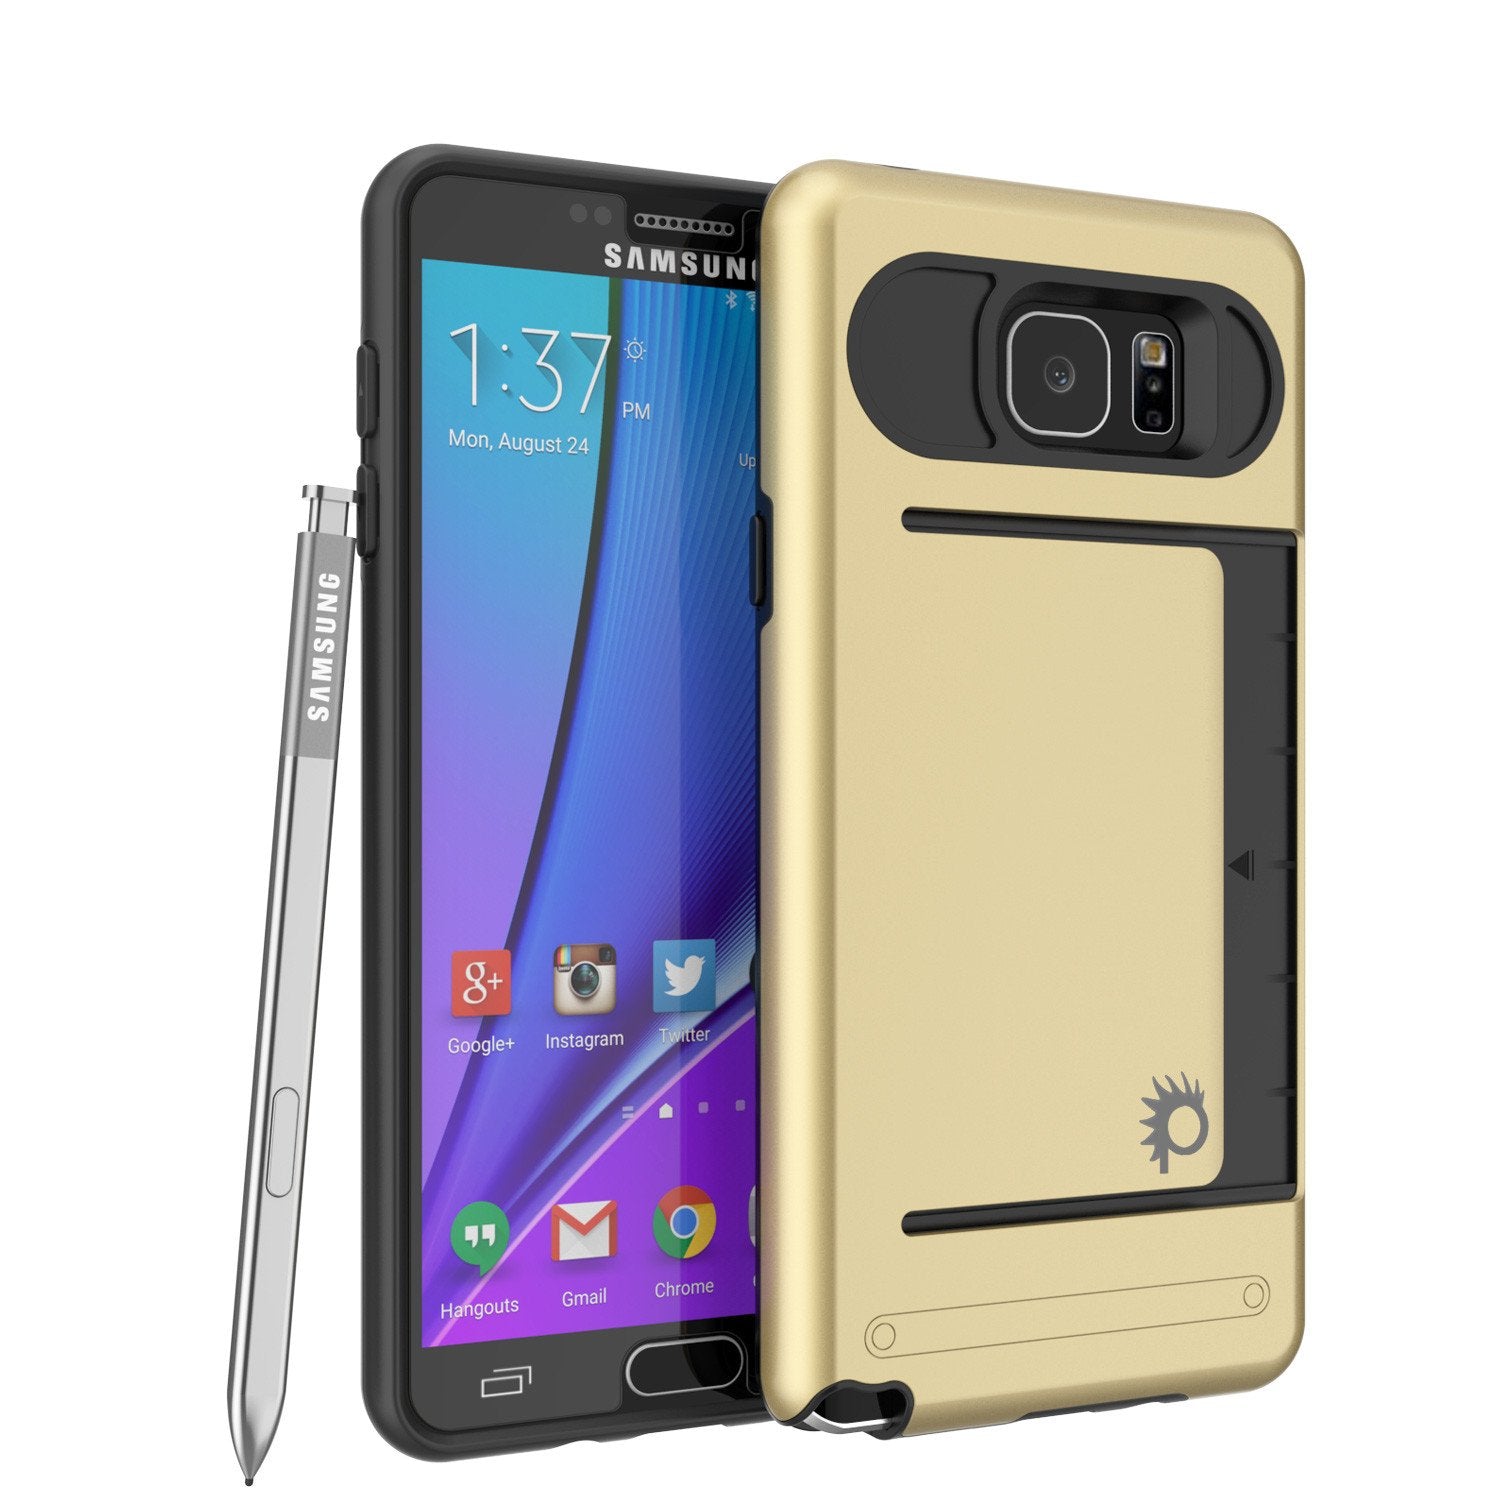 Galaxy Note 5 Case PunkCase CLUTCH Gold Series Slim Armor Soft Cover Case w/ Tempered Glass